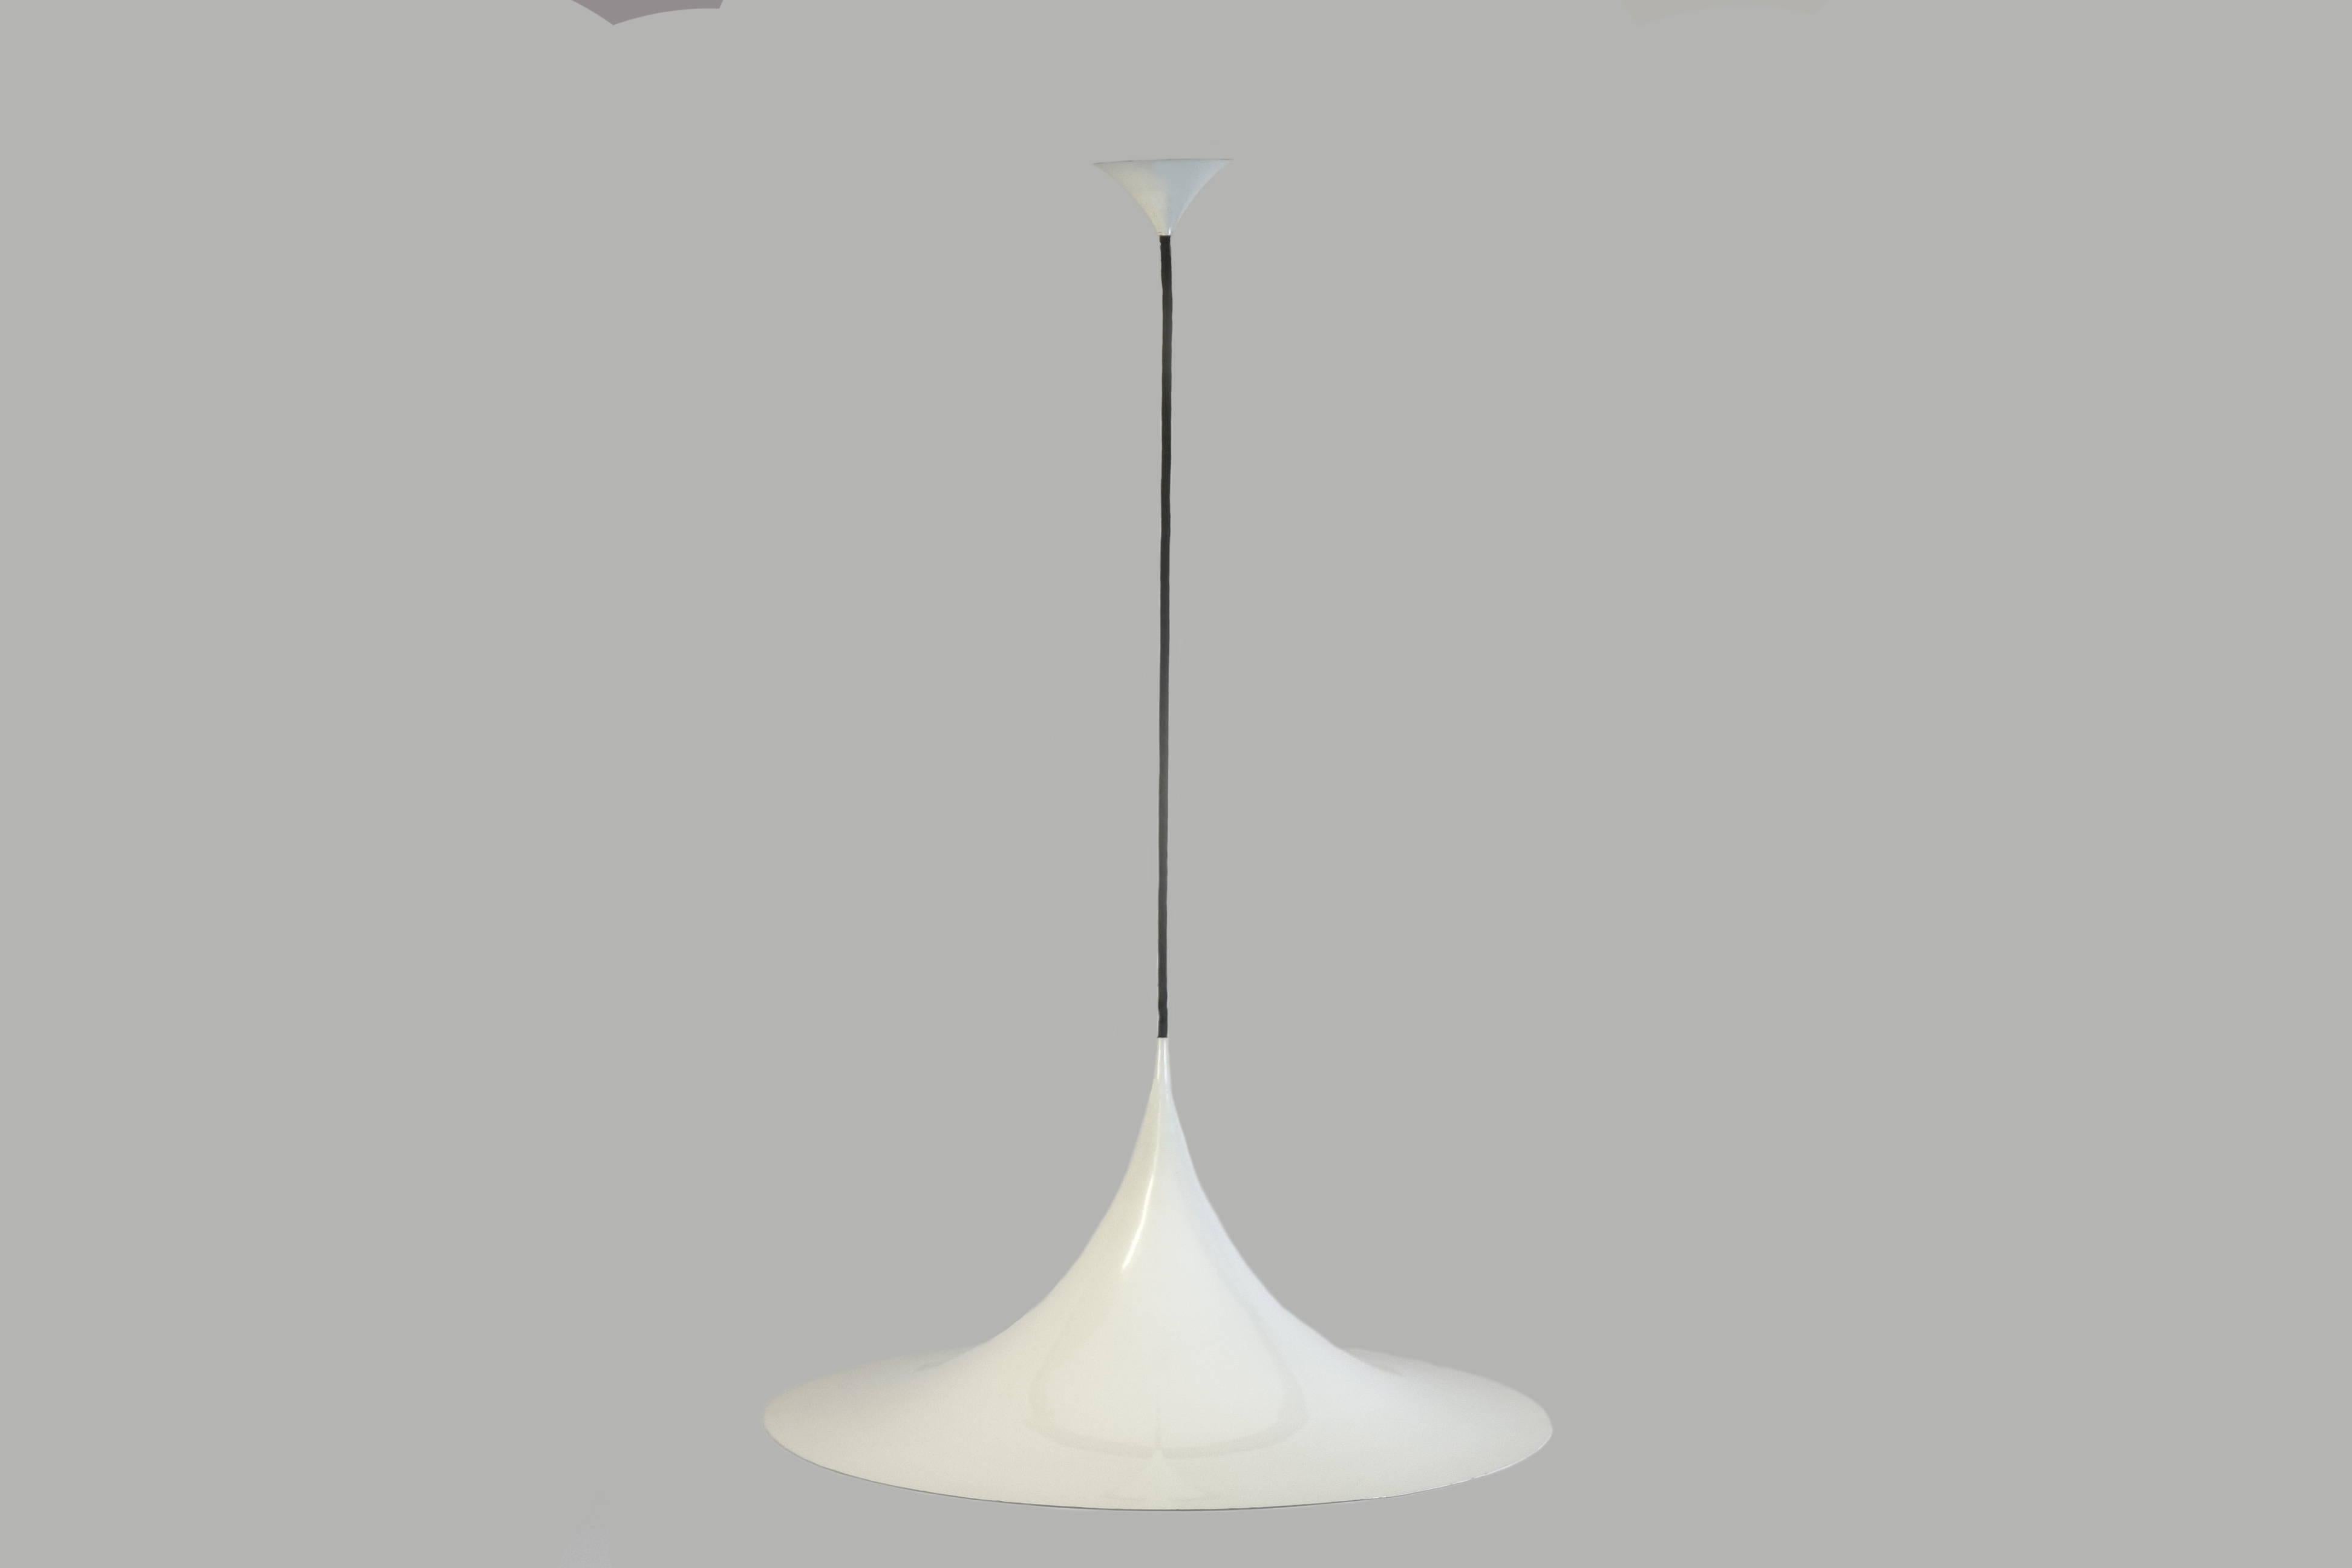 Large “Semi Pendant” ceiling lamp by Fog & Morup, Denmark 1967 midcentury chandelier in white lacquered bent metal. Design by Claus Bonderup and Torsten Torup in early Space Age style. Despite to its diameter of 70 cm it provides elegance in a